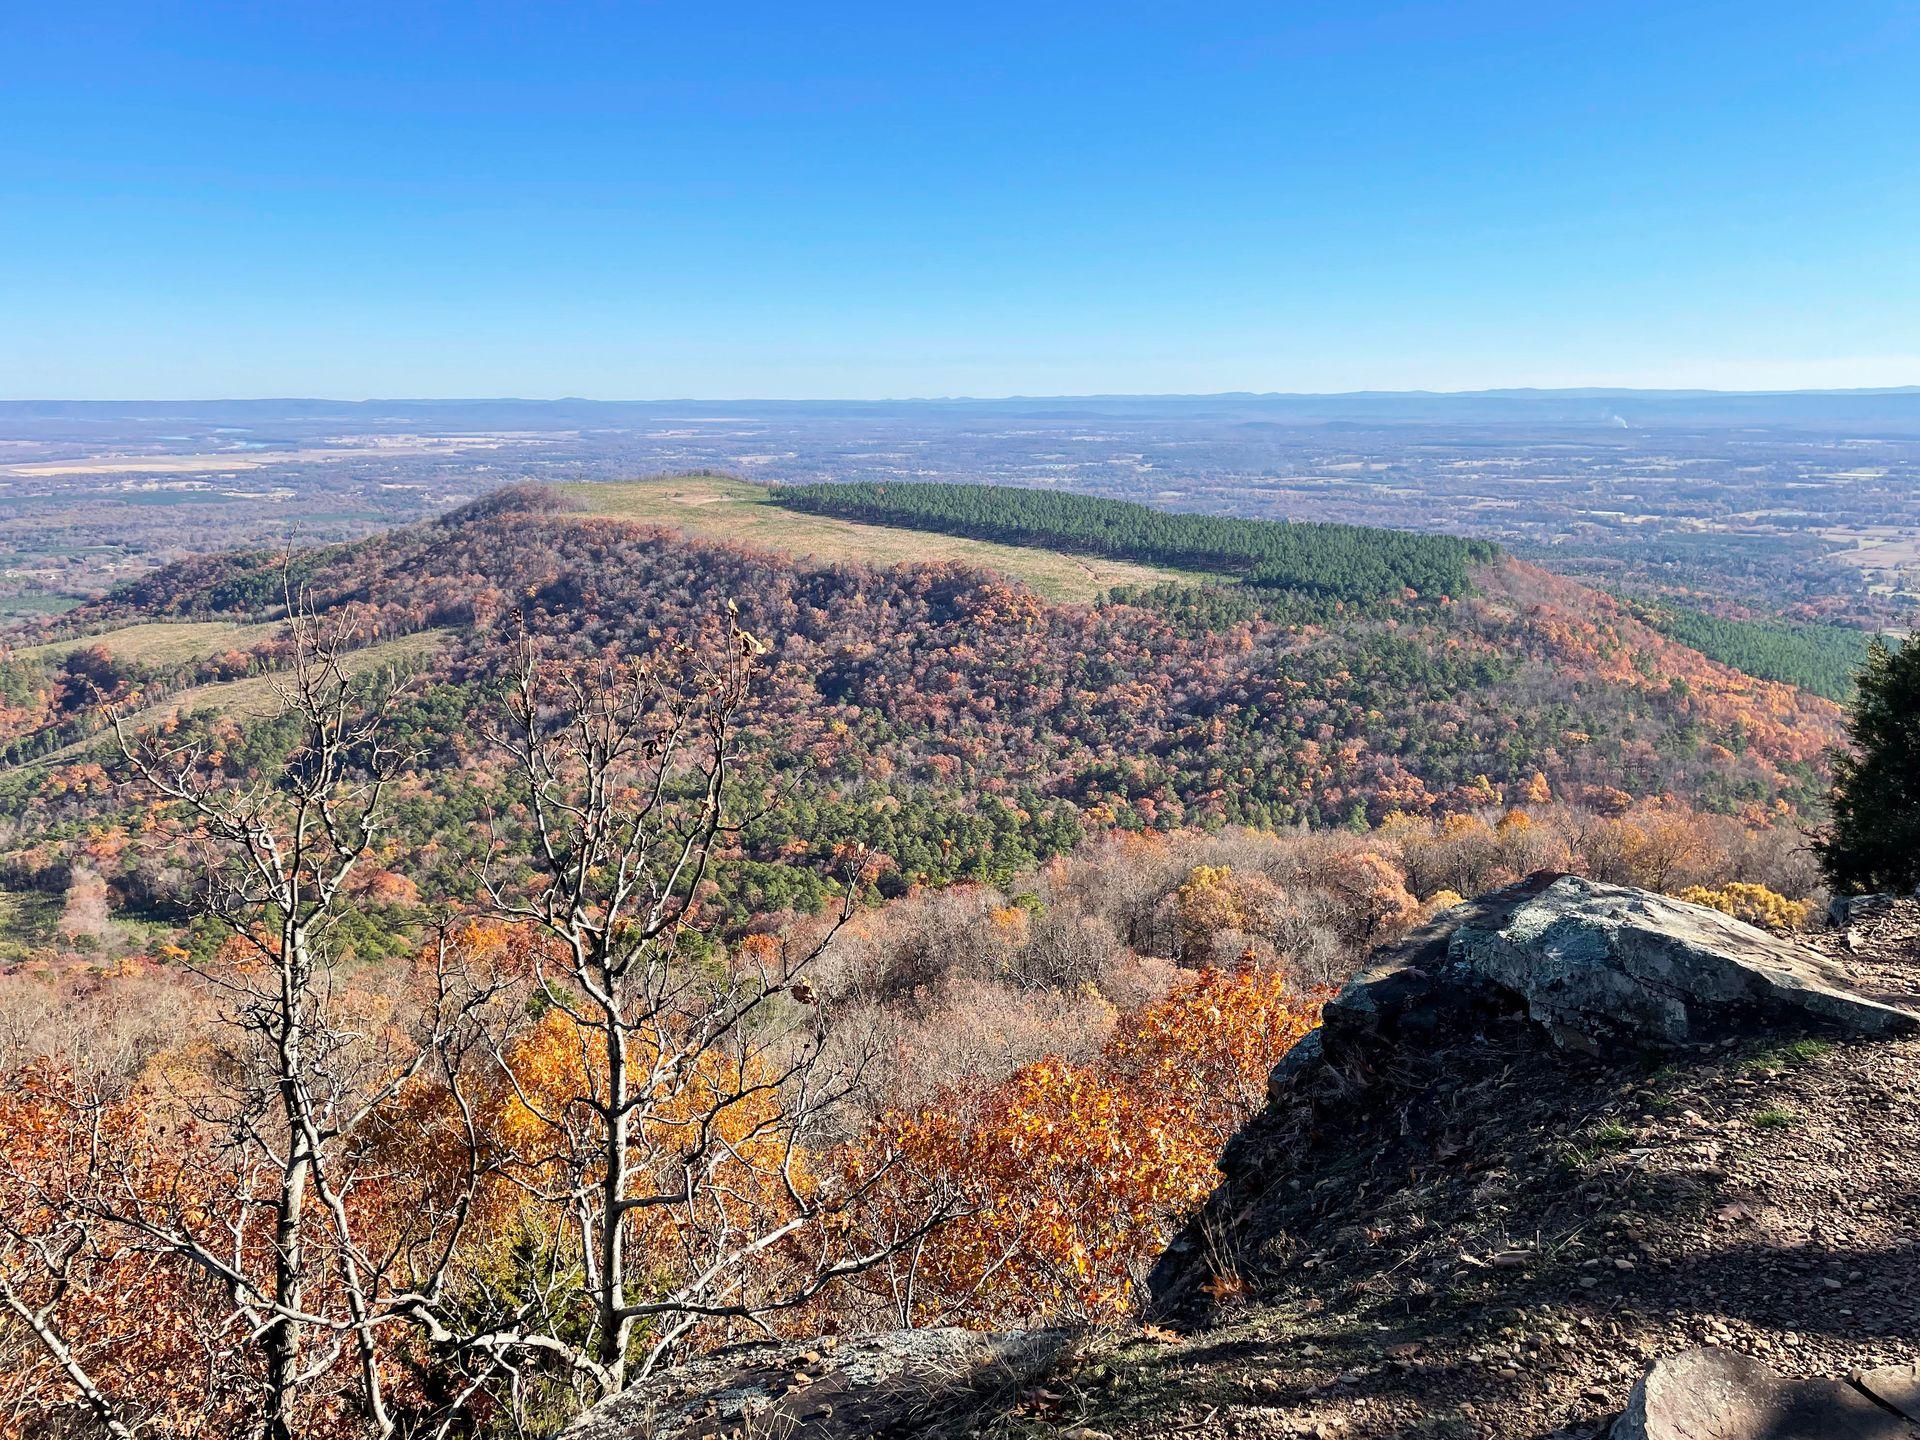 A small mountain covered in trees that are orange and green. This is a view from the Mount Nebo Rim trail.